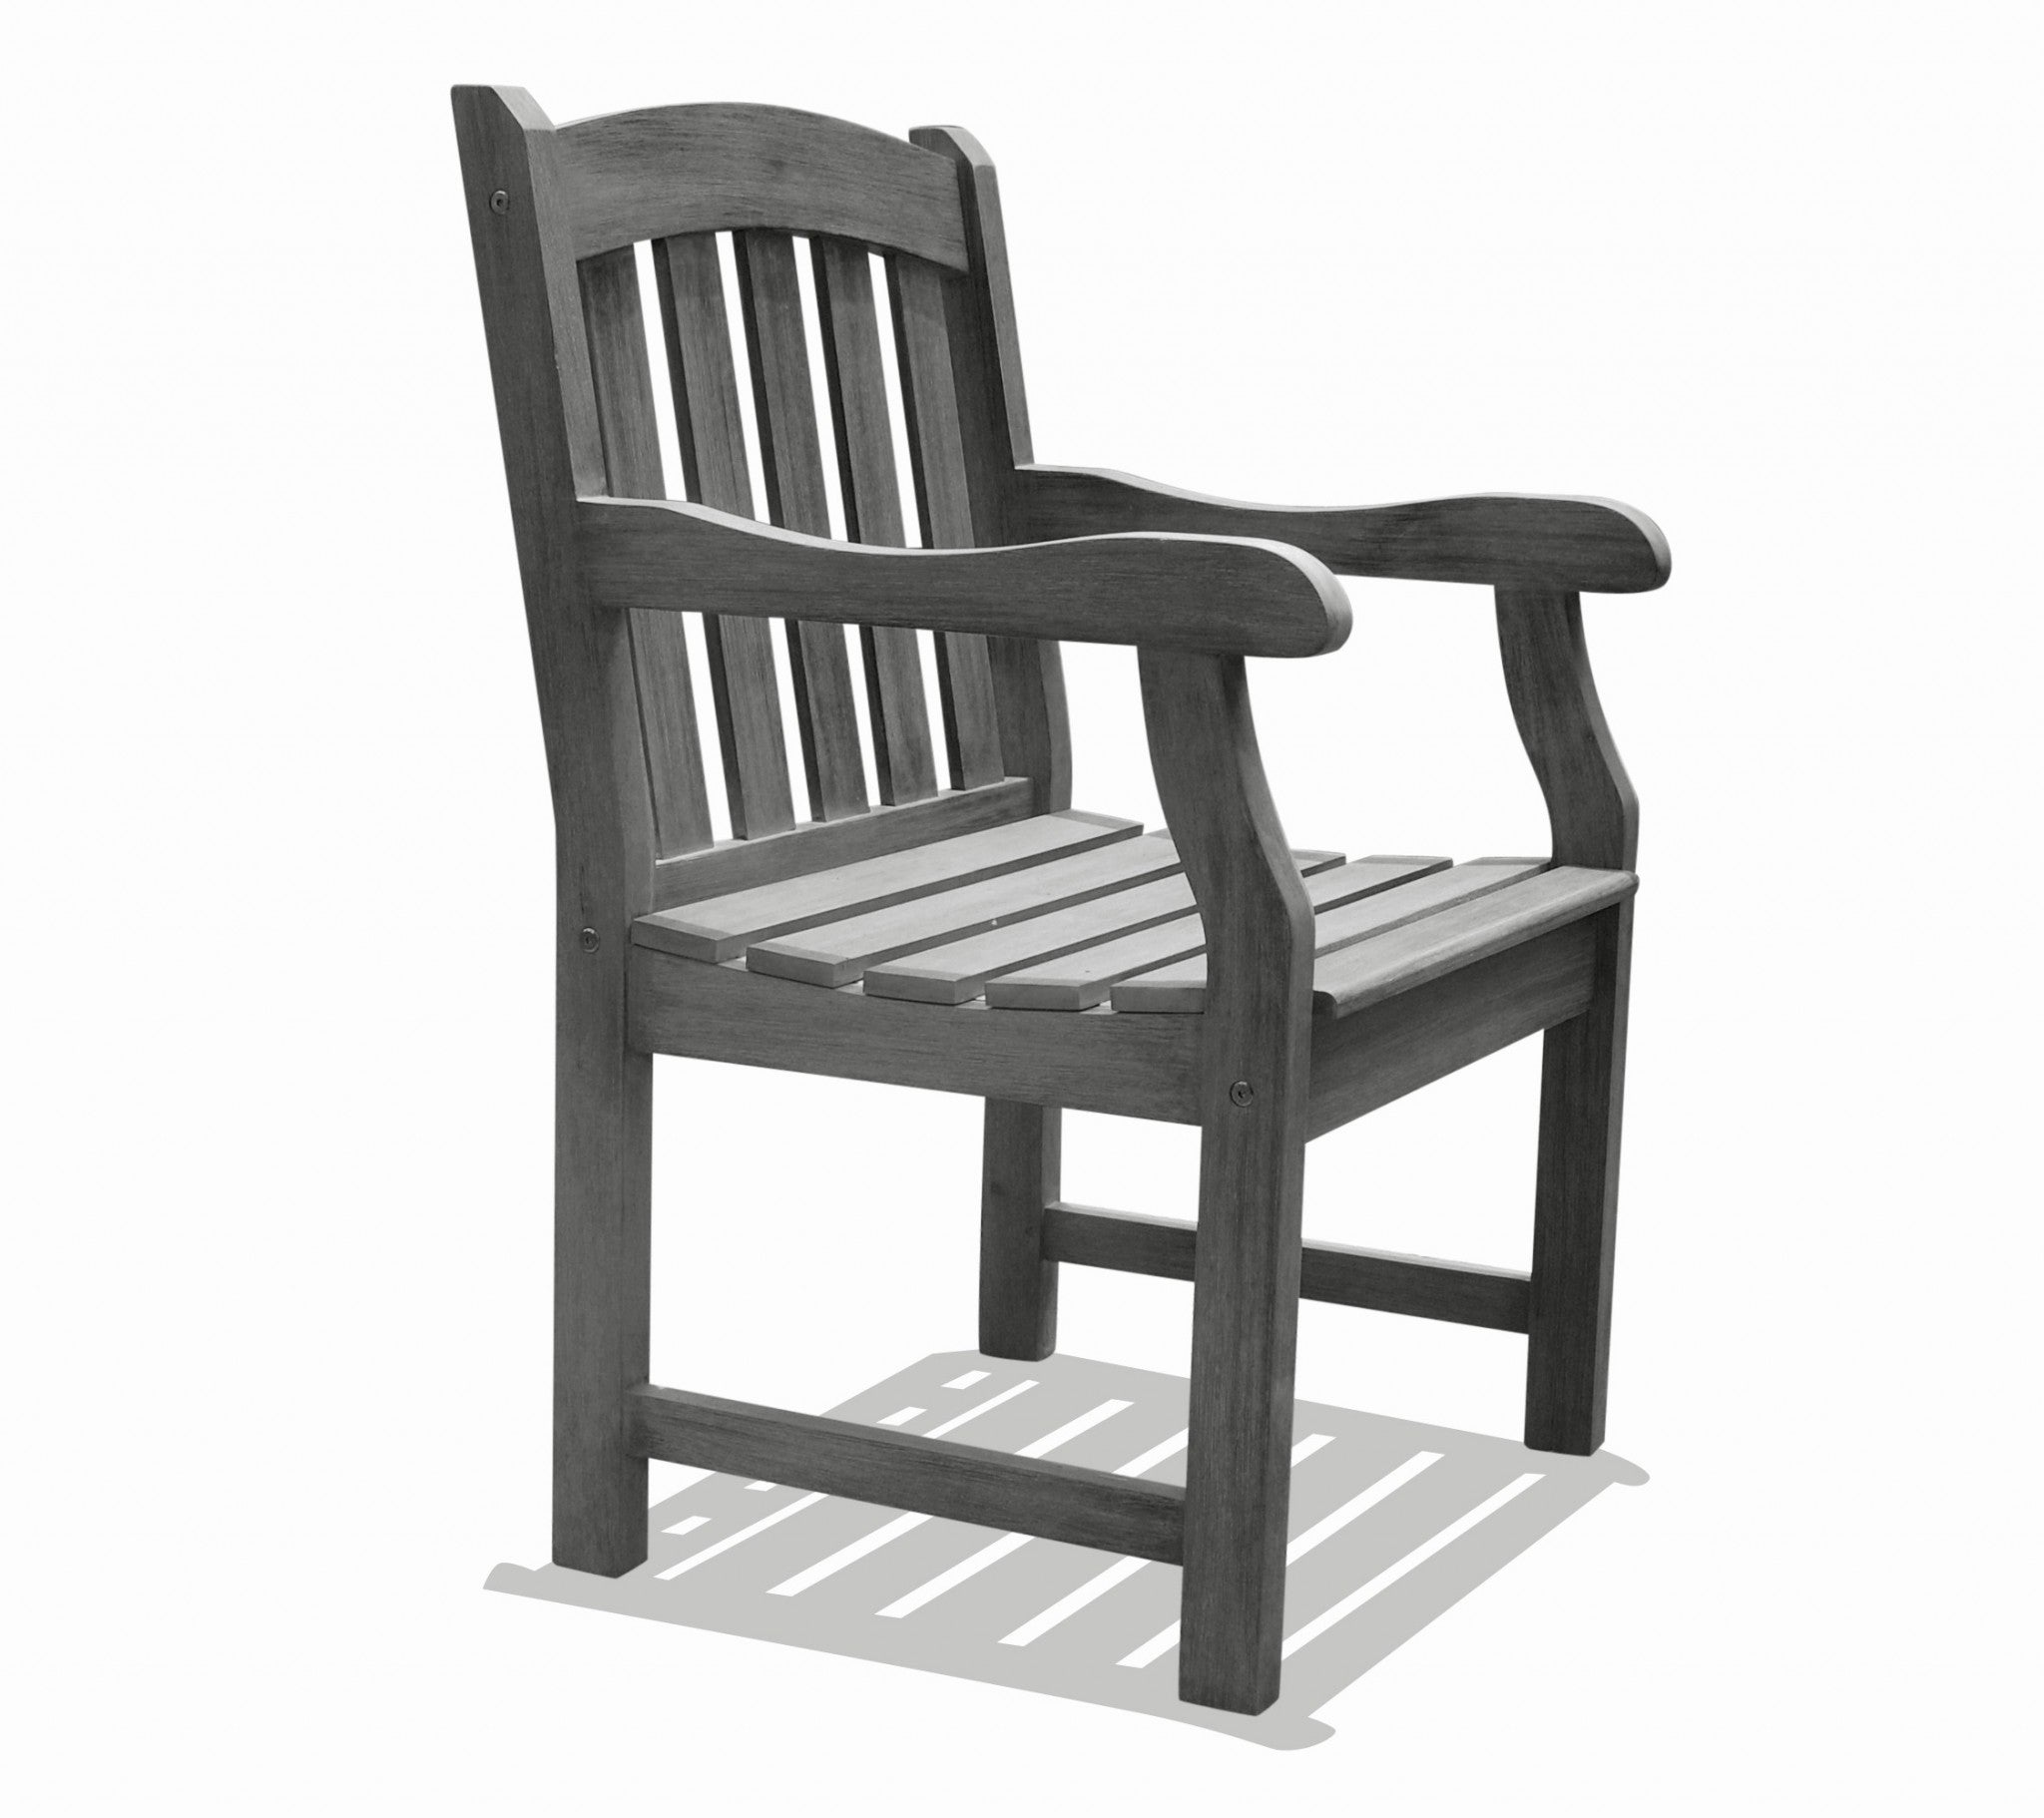 Distressed-Patio-Armchair-With-Horizontal-Slats-Outdoor-Chairs